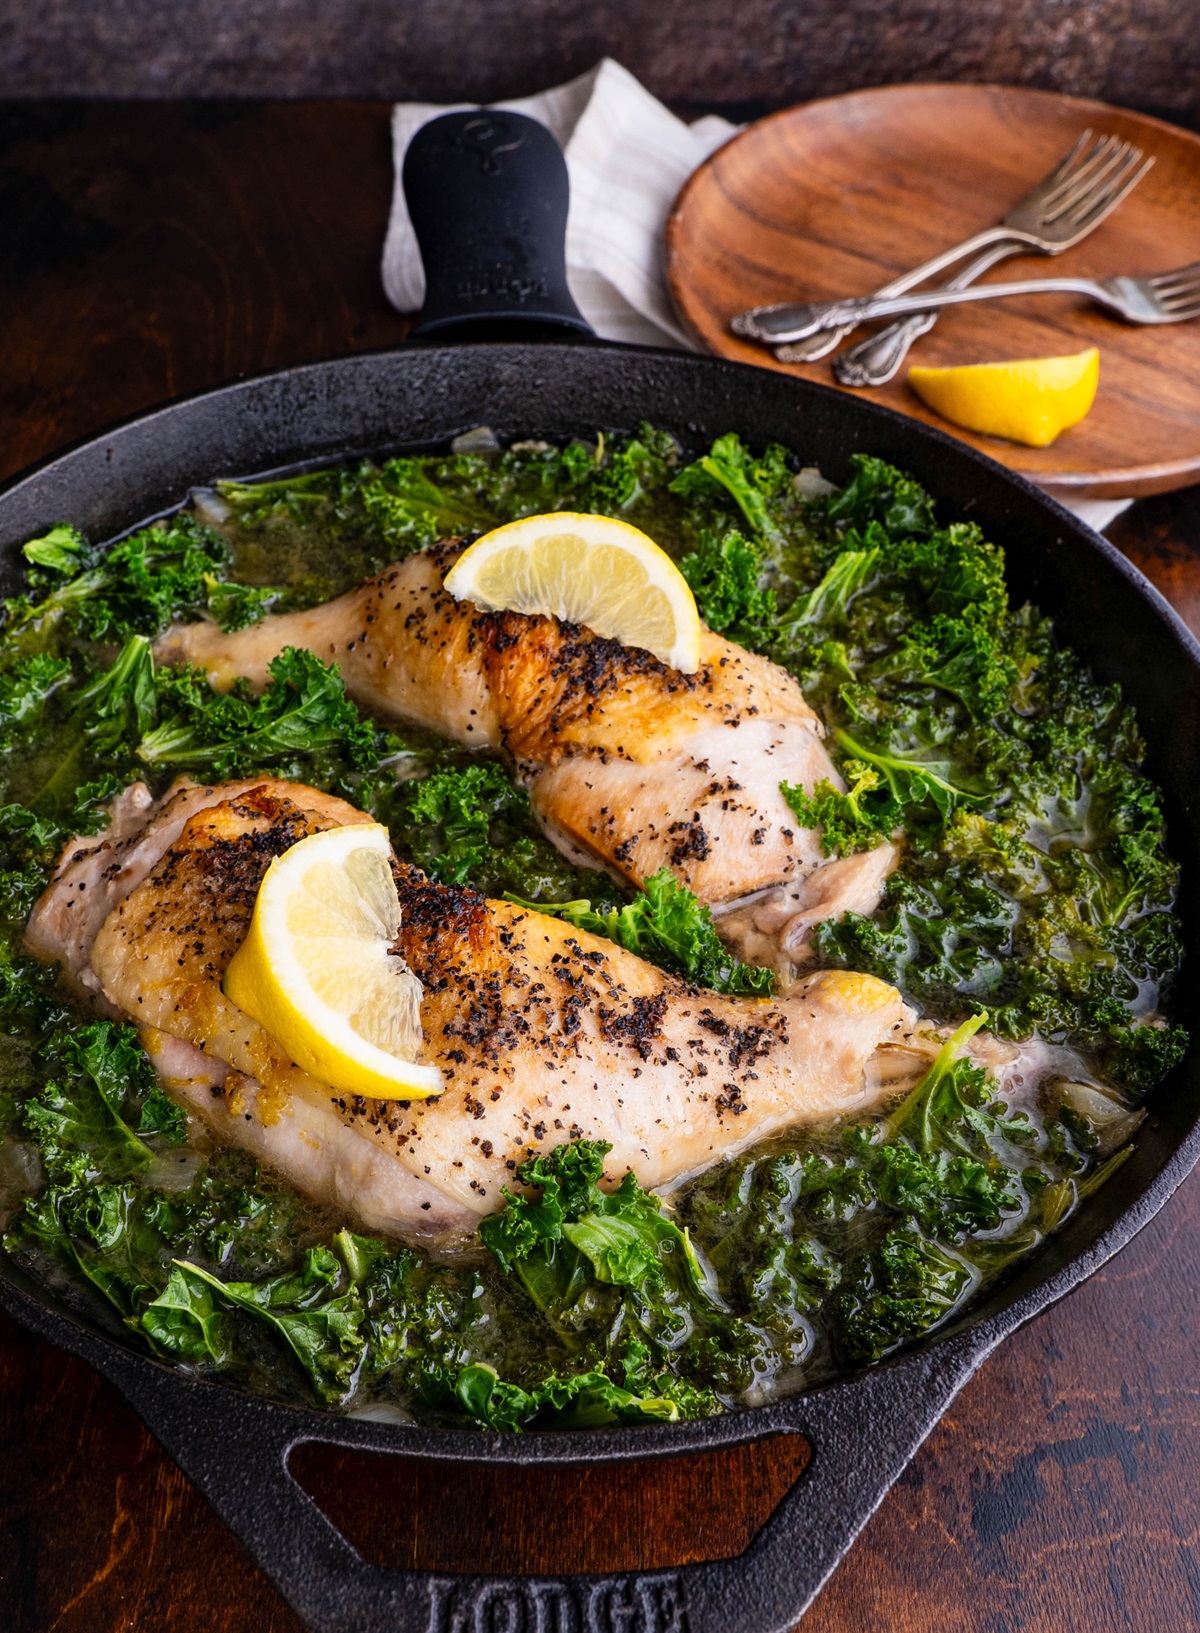 Chicken pieces in a cast iron skillet with braised kale. Ready to eat.